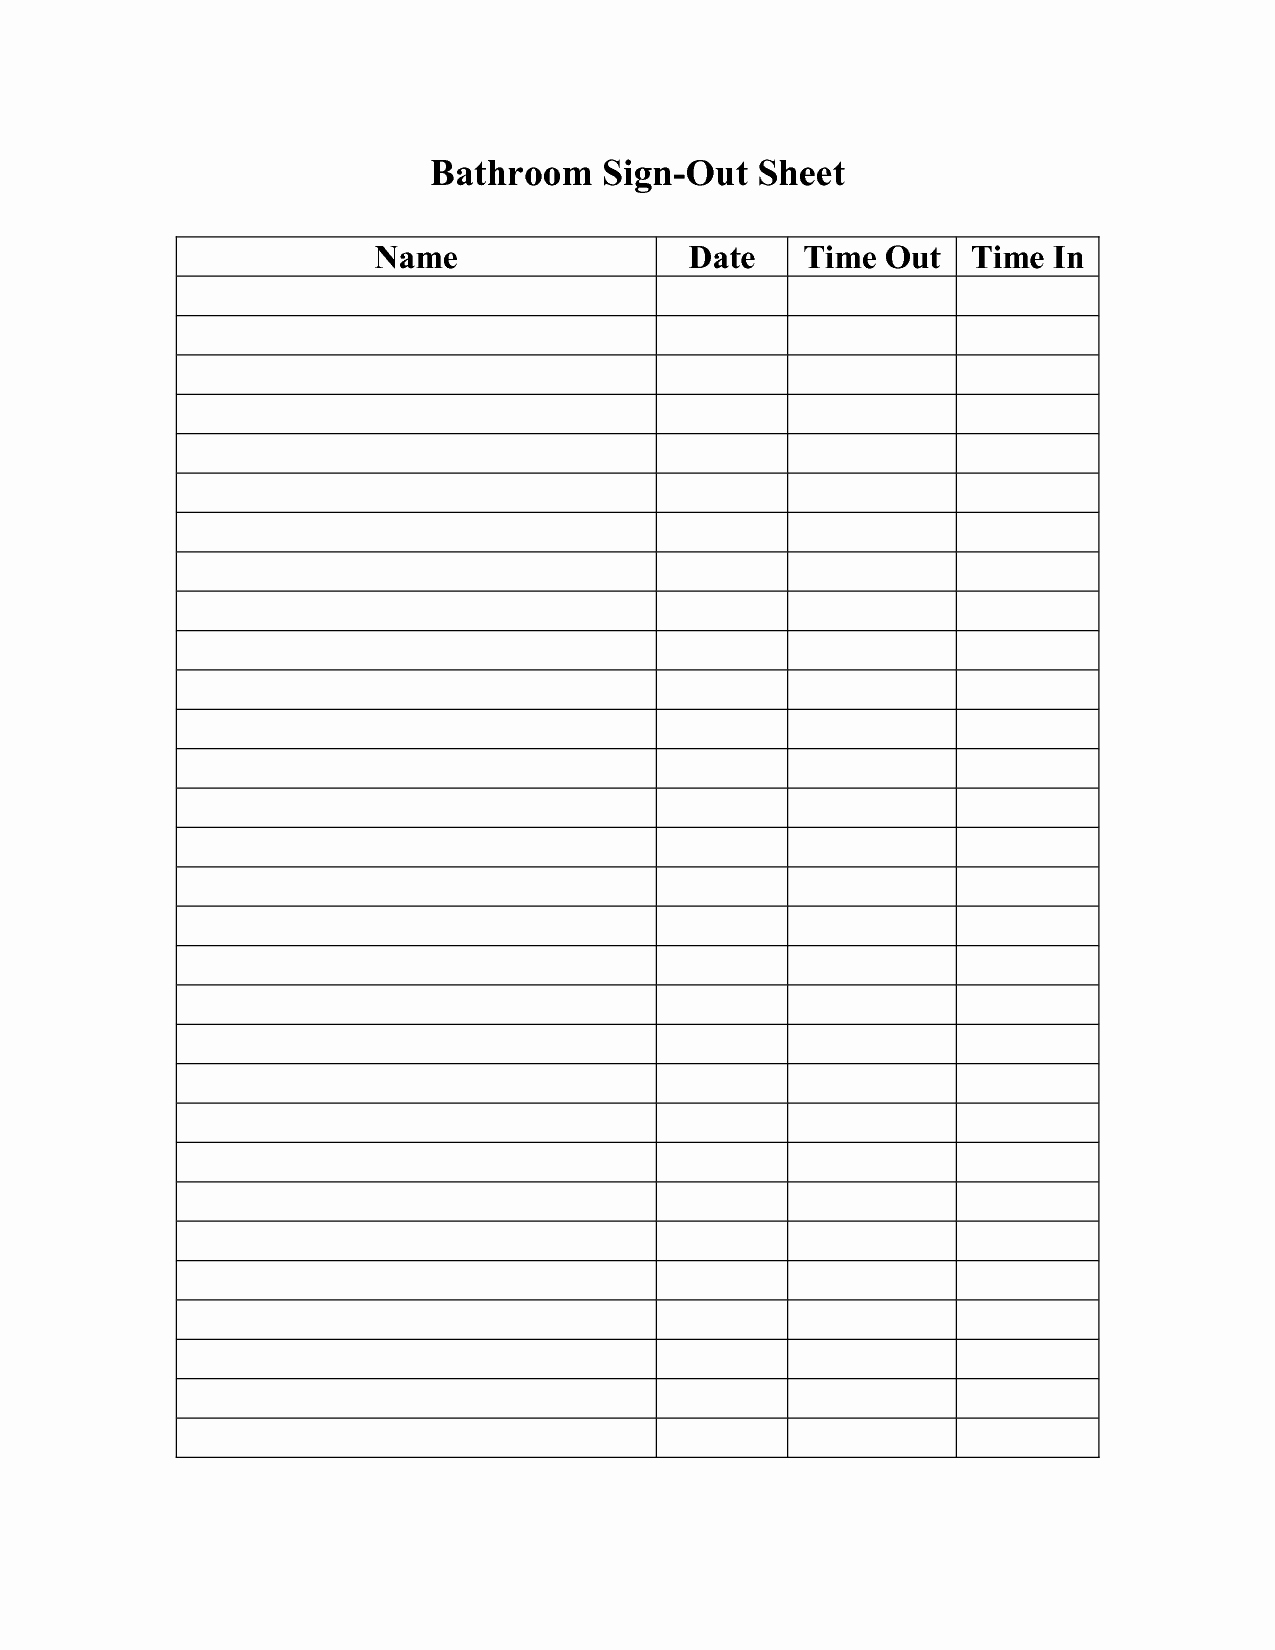 Sign In Sheet Template Free Awesome Bathroom Sign Out Sheet Template